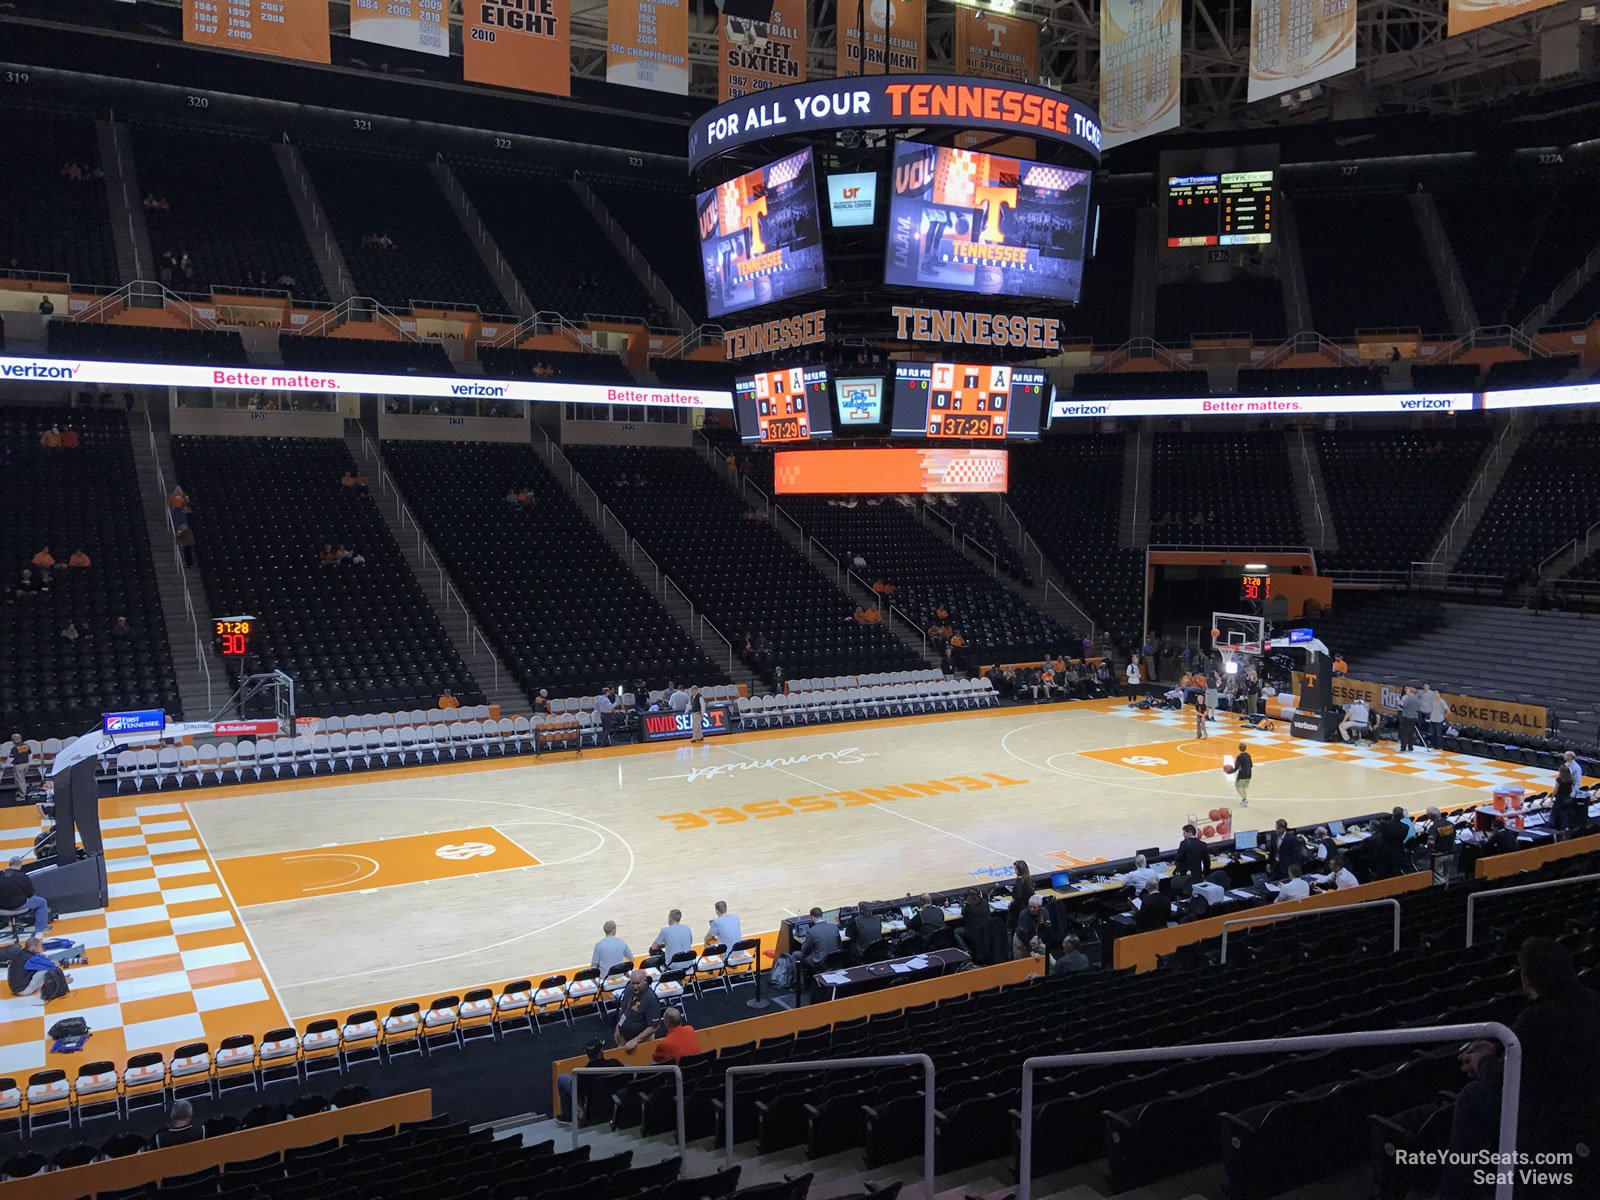 section 107, row 17 seat view  - thompson-boling arena